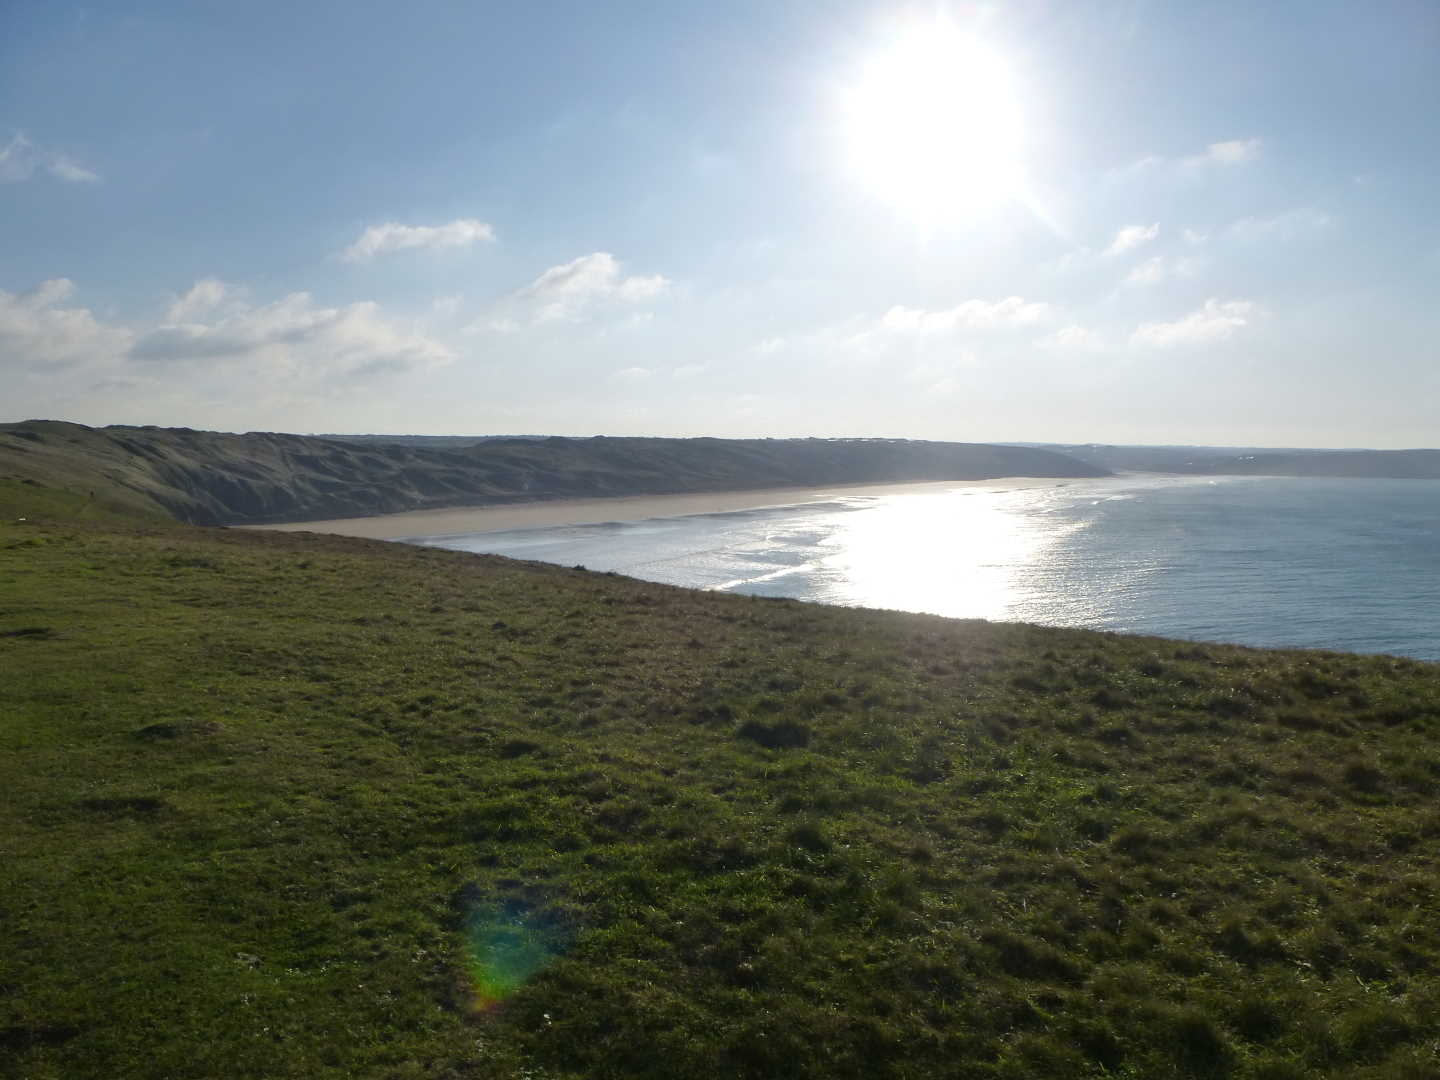 A view of the beach from the clifftops with the sun in the distance